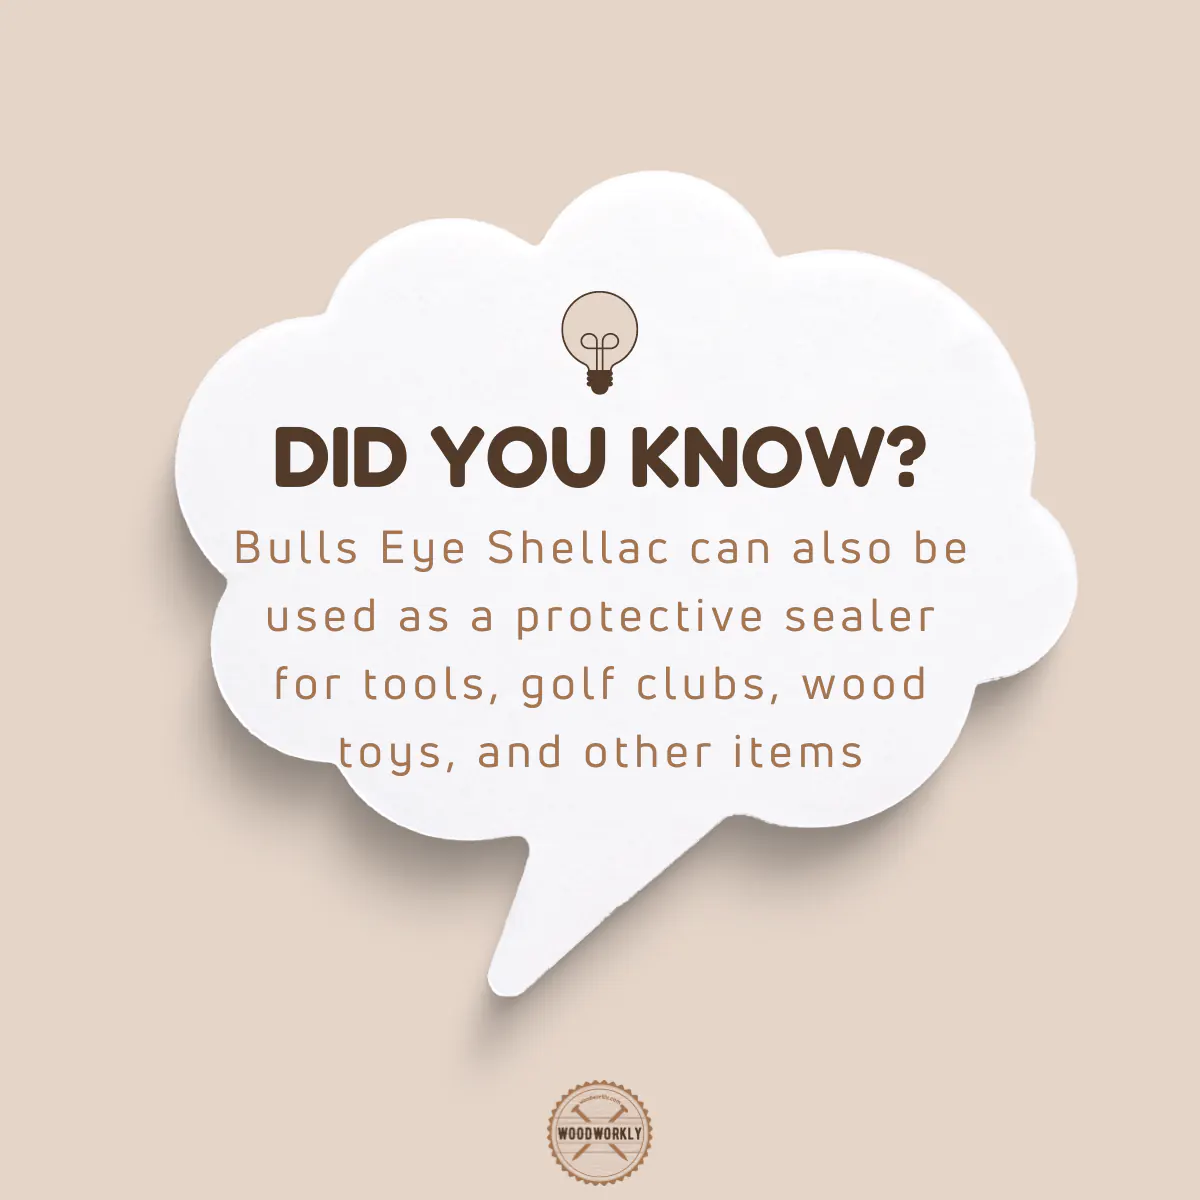 Did you know fact about Bulls Eye Shellac